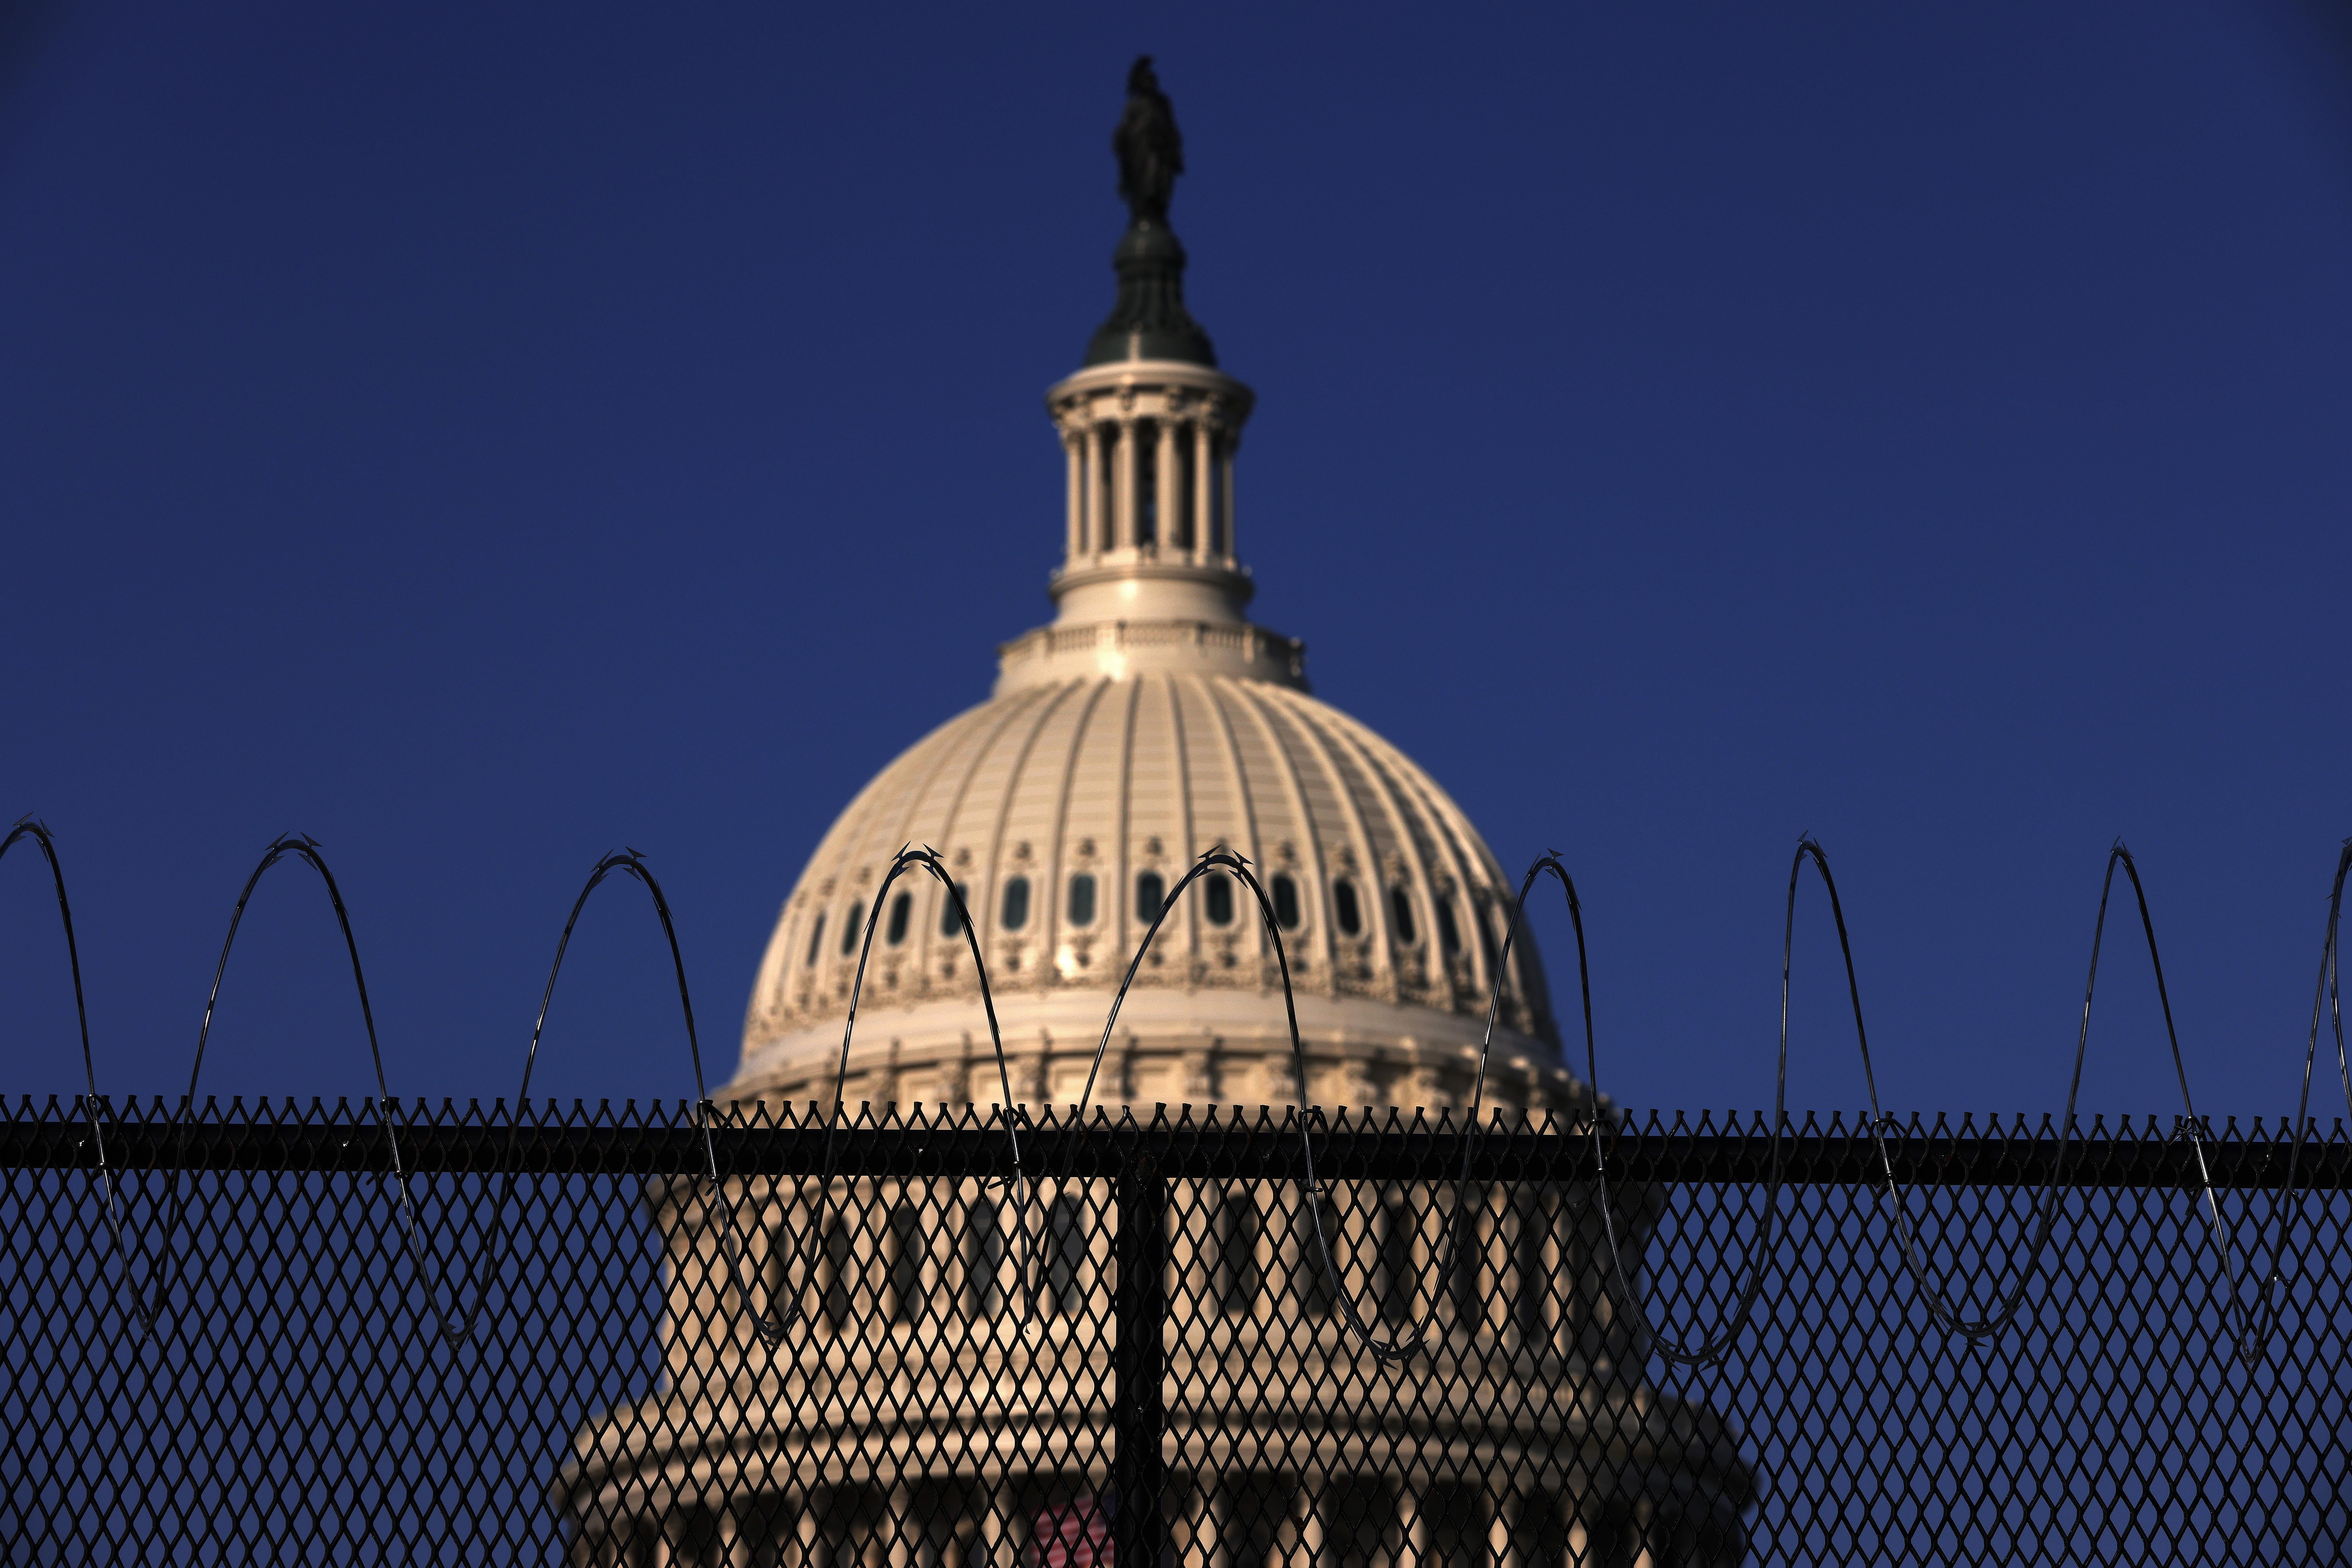 Razor wire is seen on the top of fencing that surrounds the Capitol.